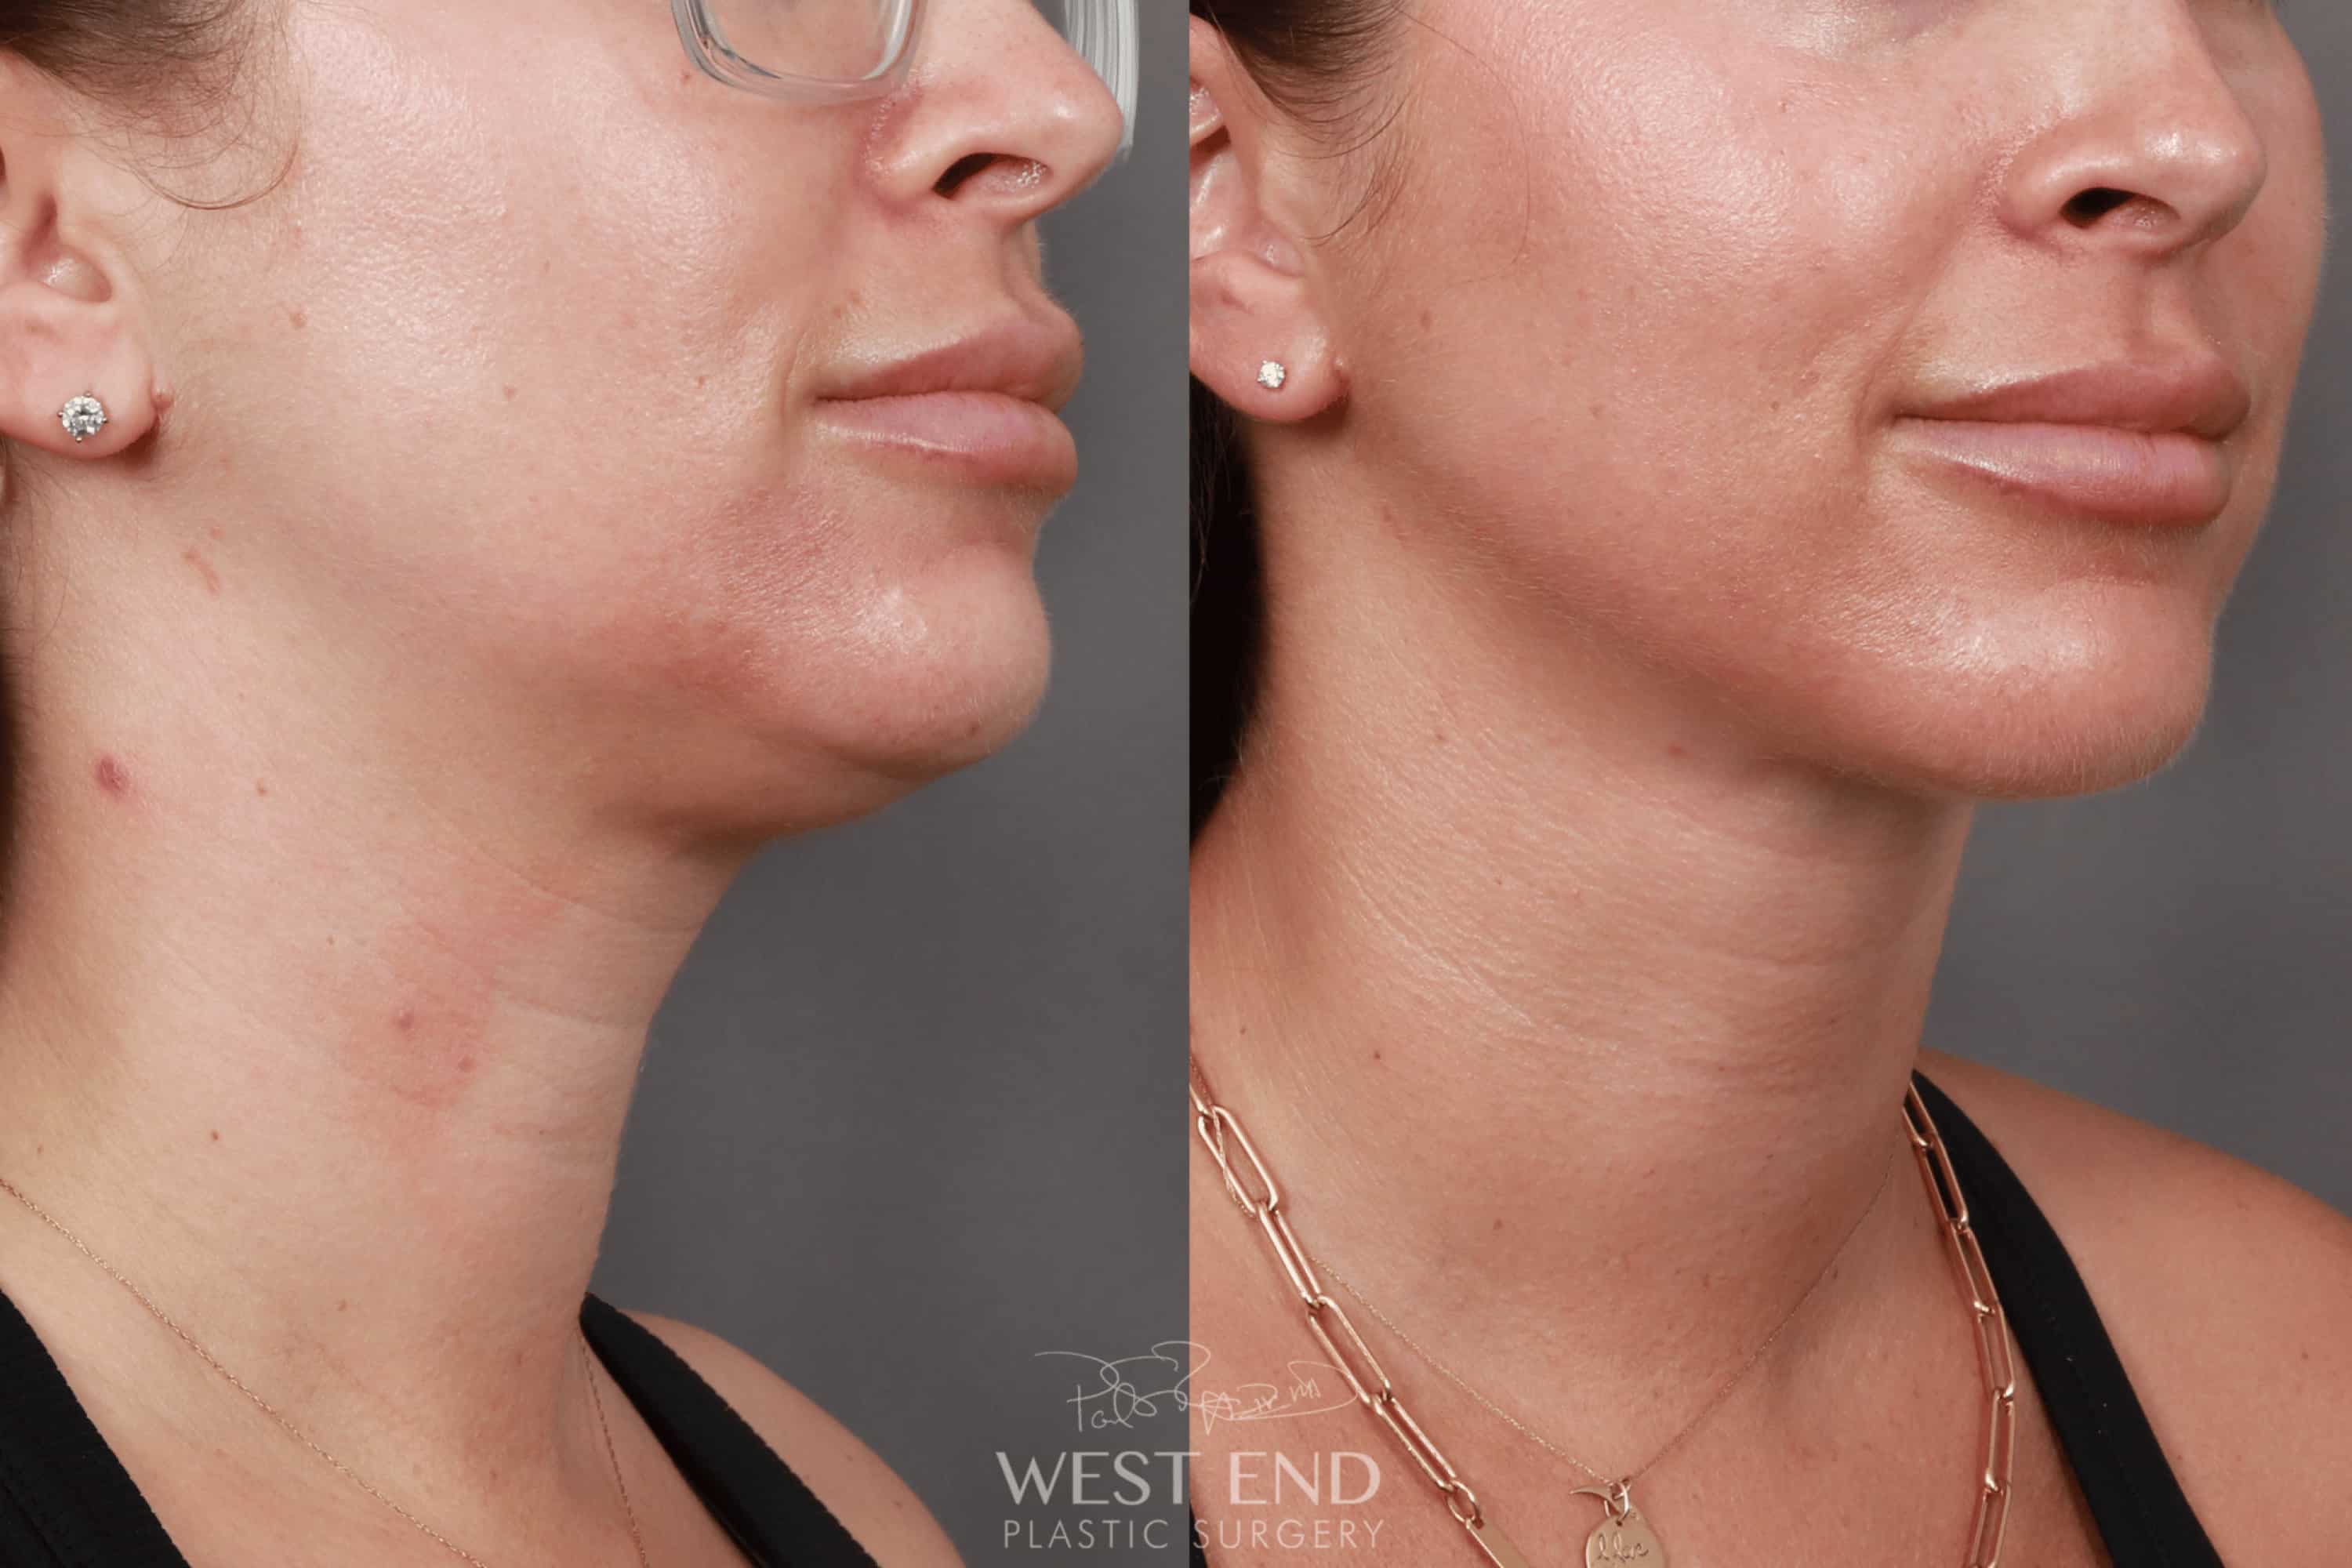 Liposuction of the Submental, Jawline, and Neck Region (5 Months Post-Op)